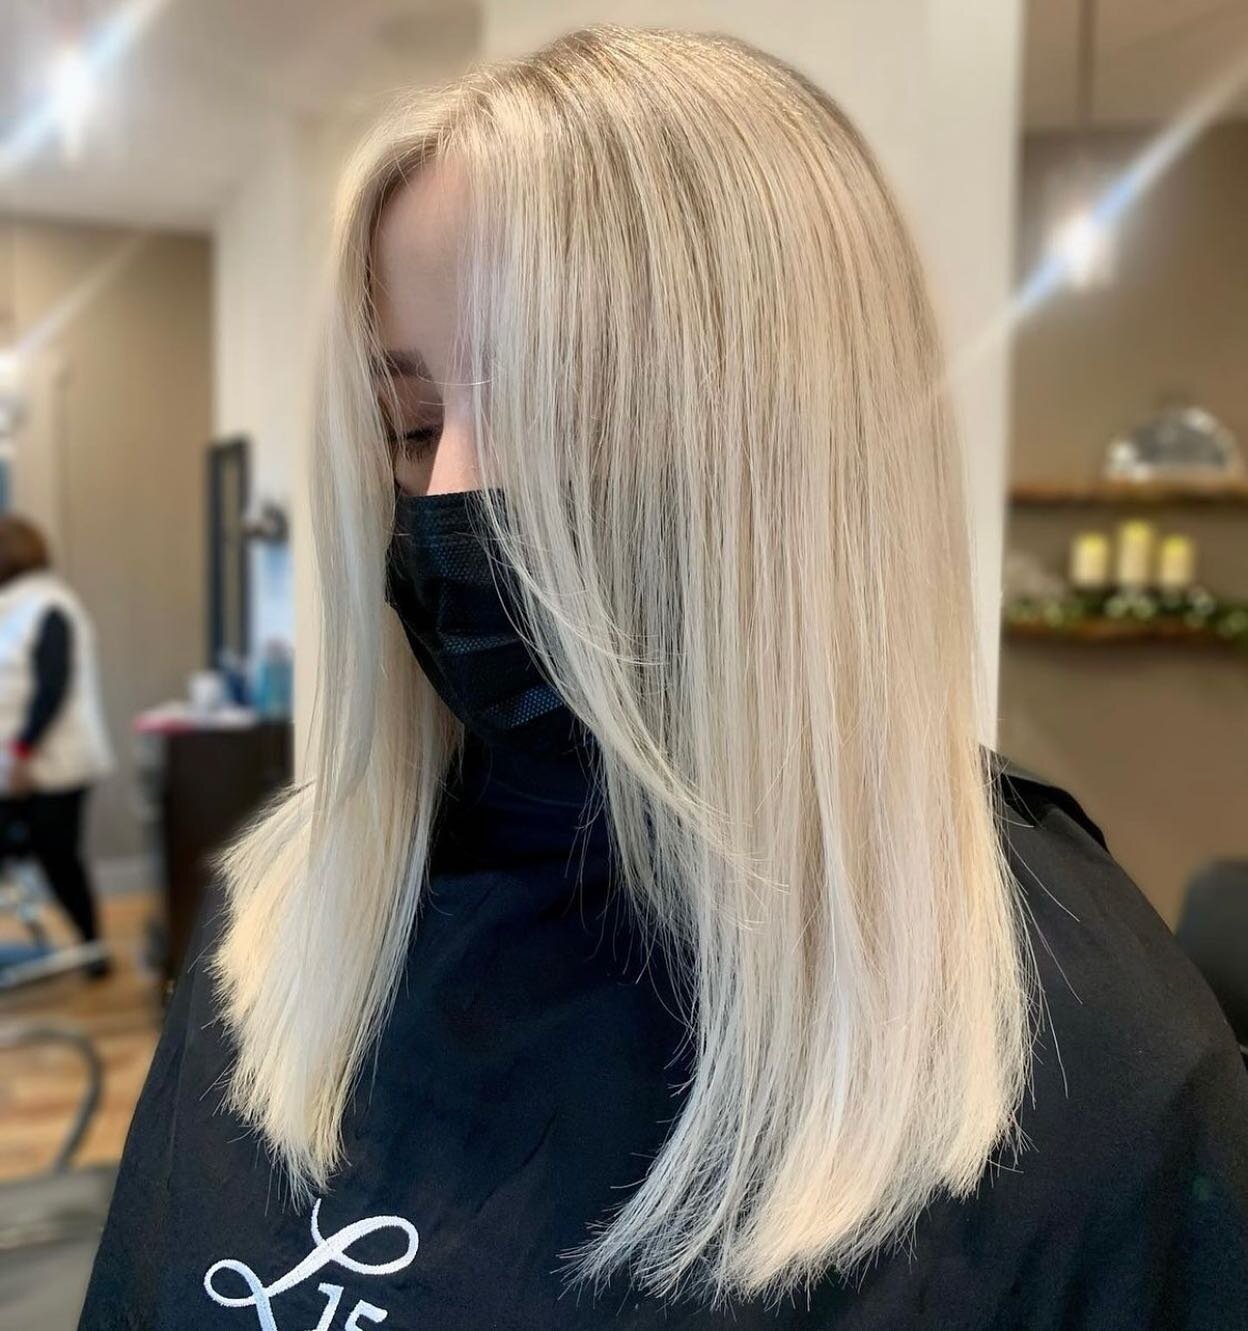 @morganlynnstyles gives us heart eyes every time. 😍

Have blonde ambitions in the new year? Let&rsquo;s get you scheduled. Link in Bio.

-
-
-
-
@l15salon #l15salon #issaquah #issaquahstylist #issaquahsalon #issaquahhair #issaquahhairsalon #bellevue